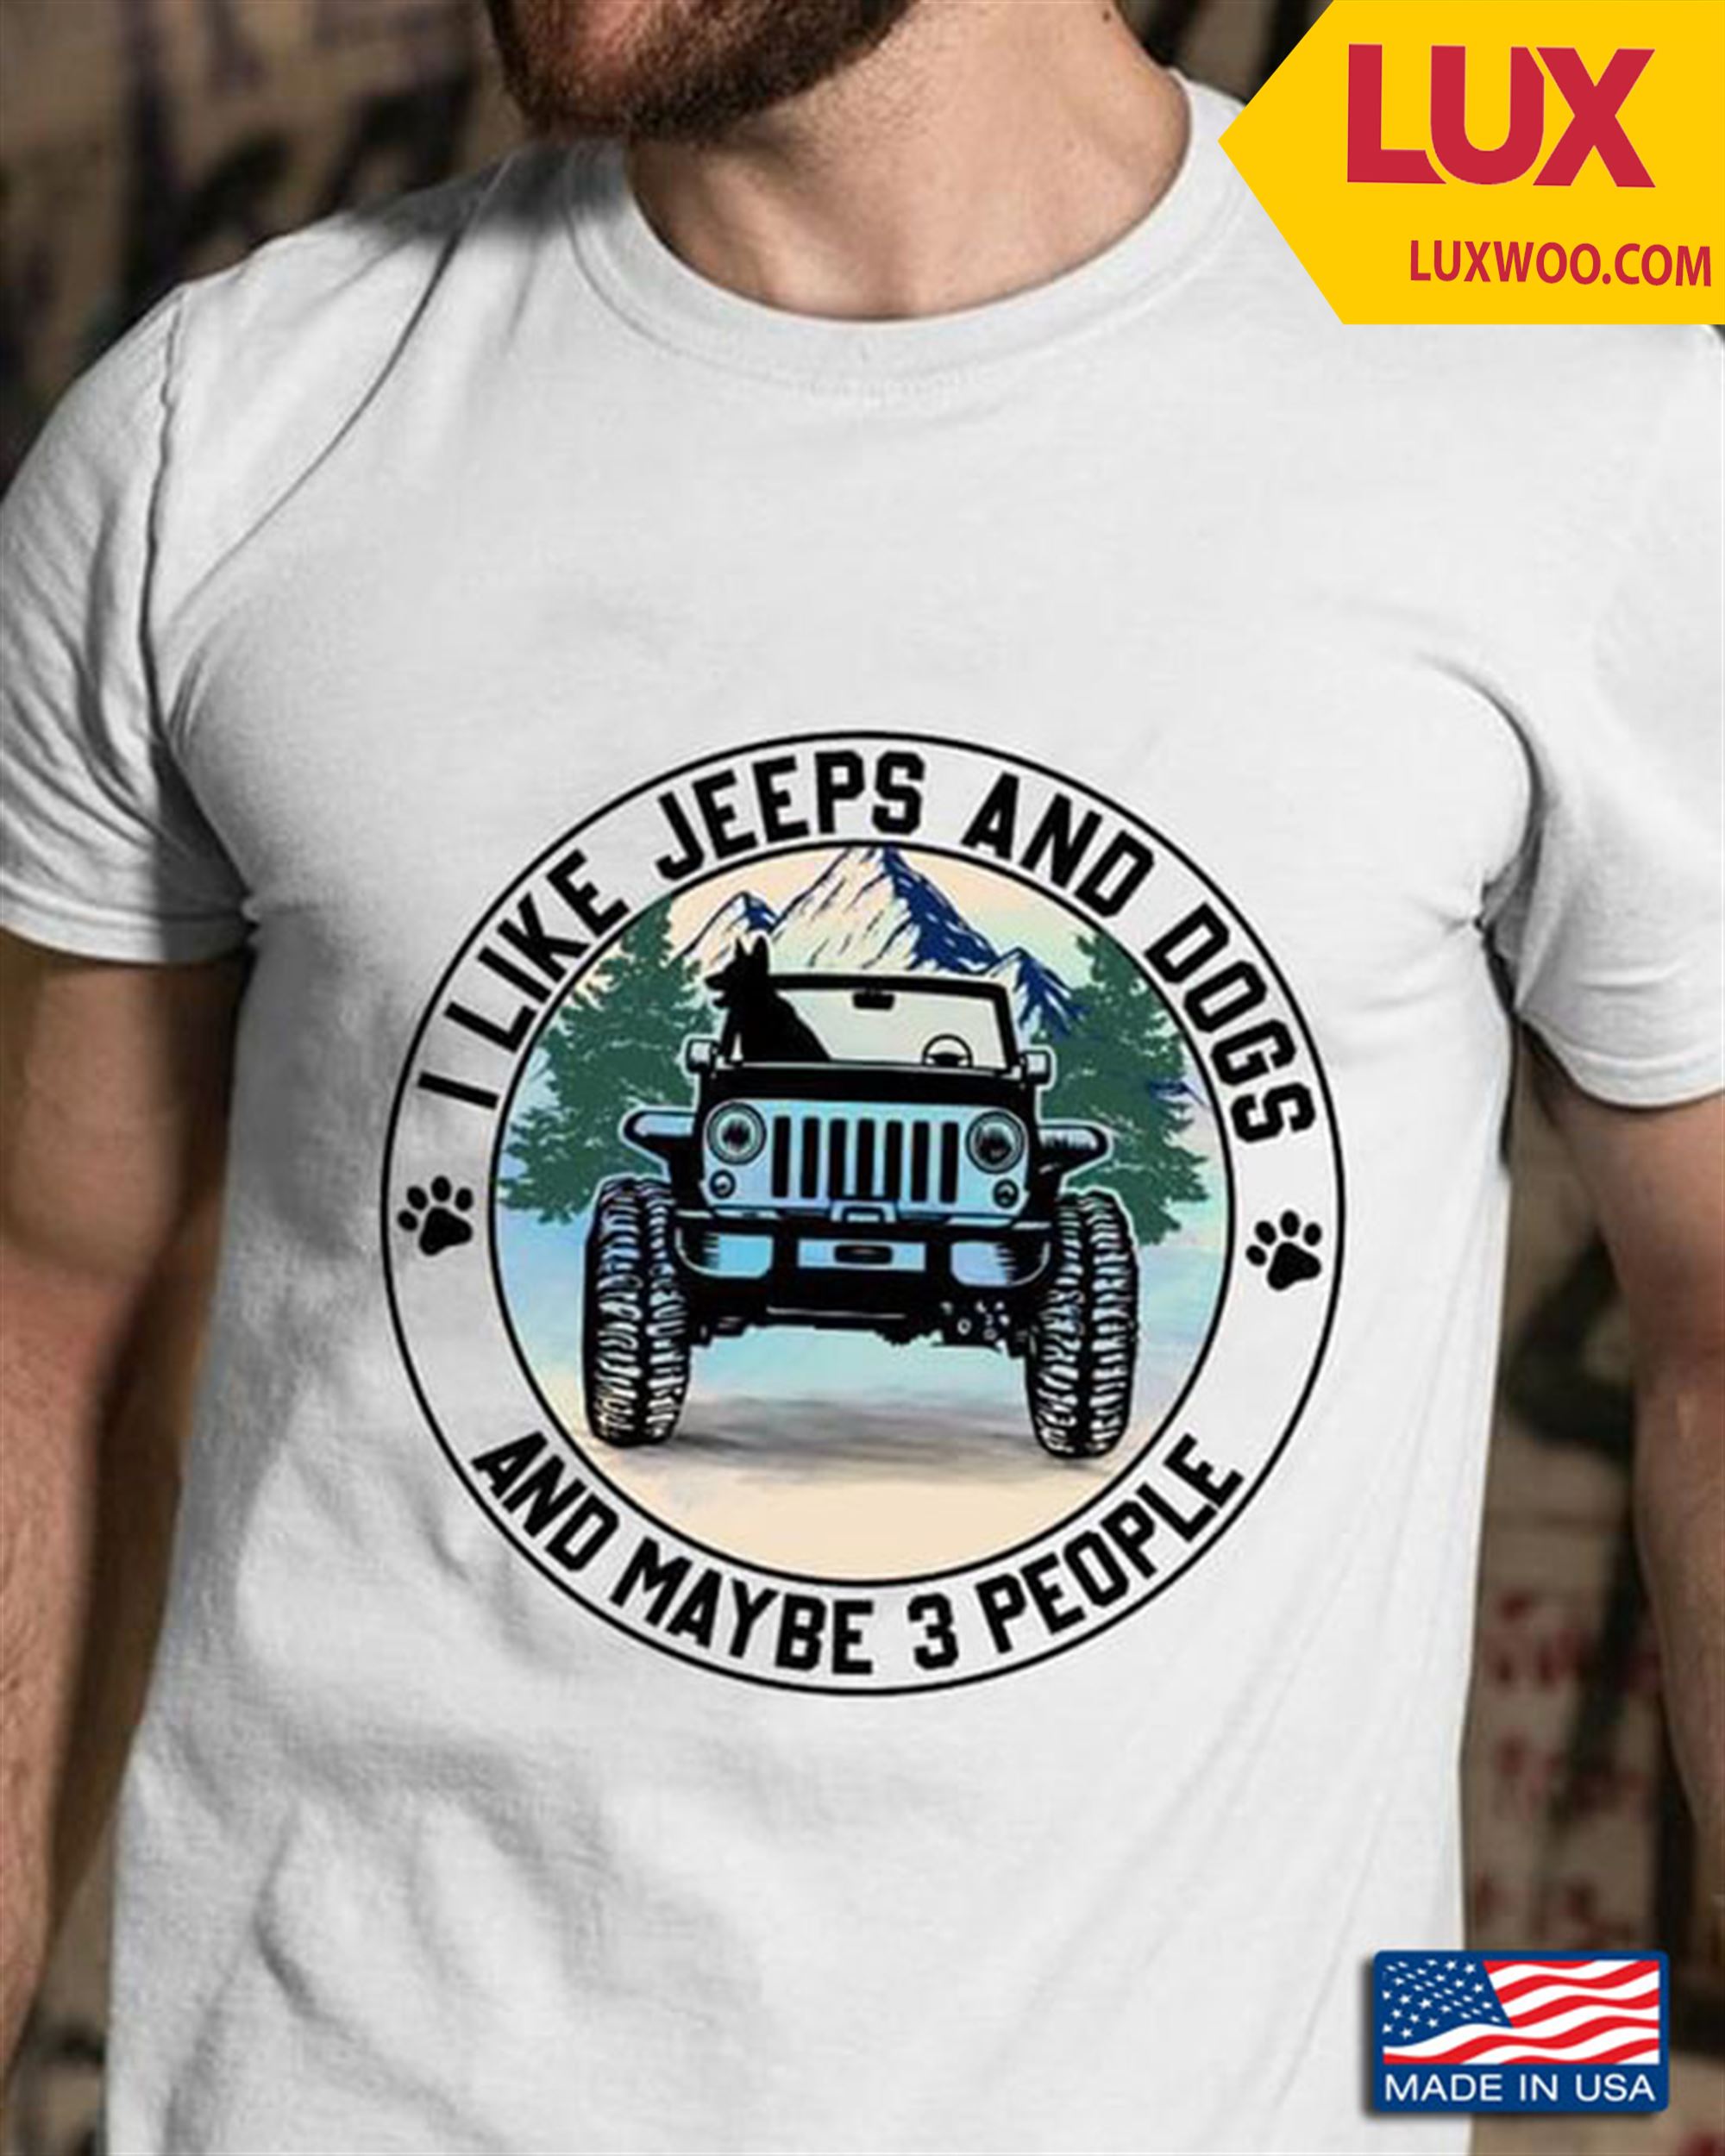 I Like Jeep And Dogs And Maybe 3 People Tshirt Size Up To 5xl